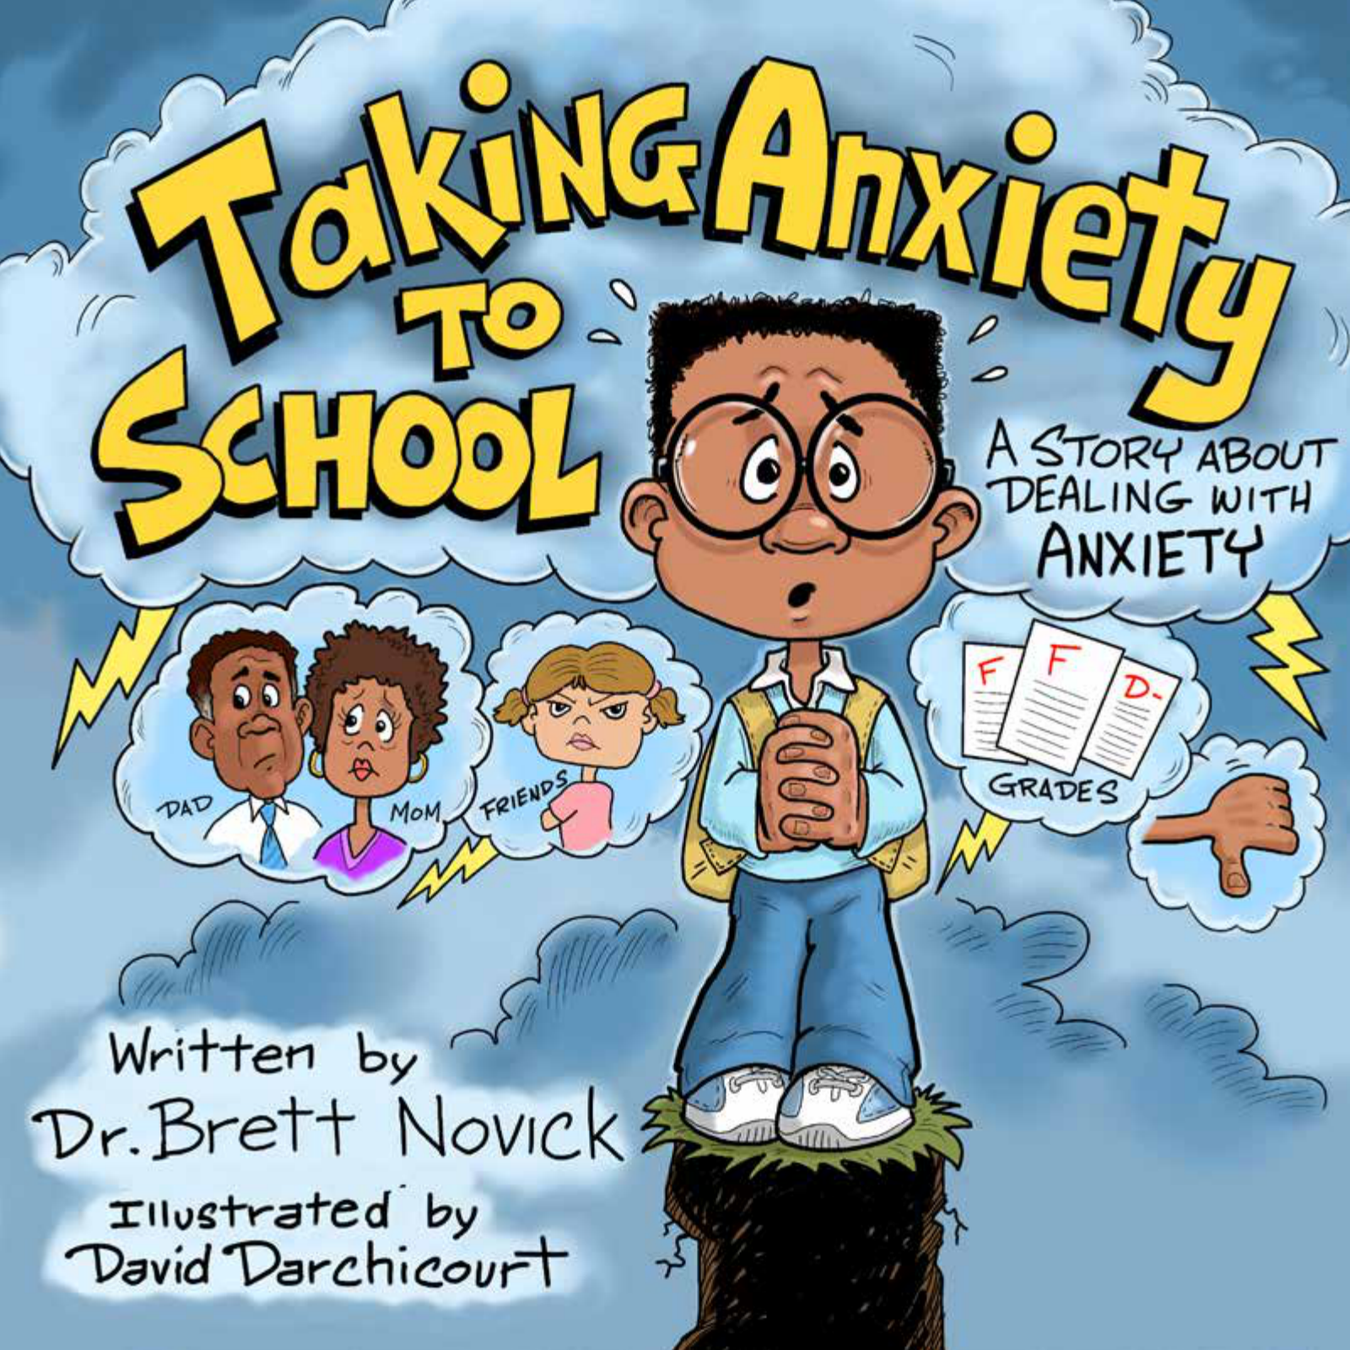 SCHOOL COUNSELING GAMES AND BOOKS